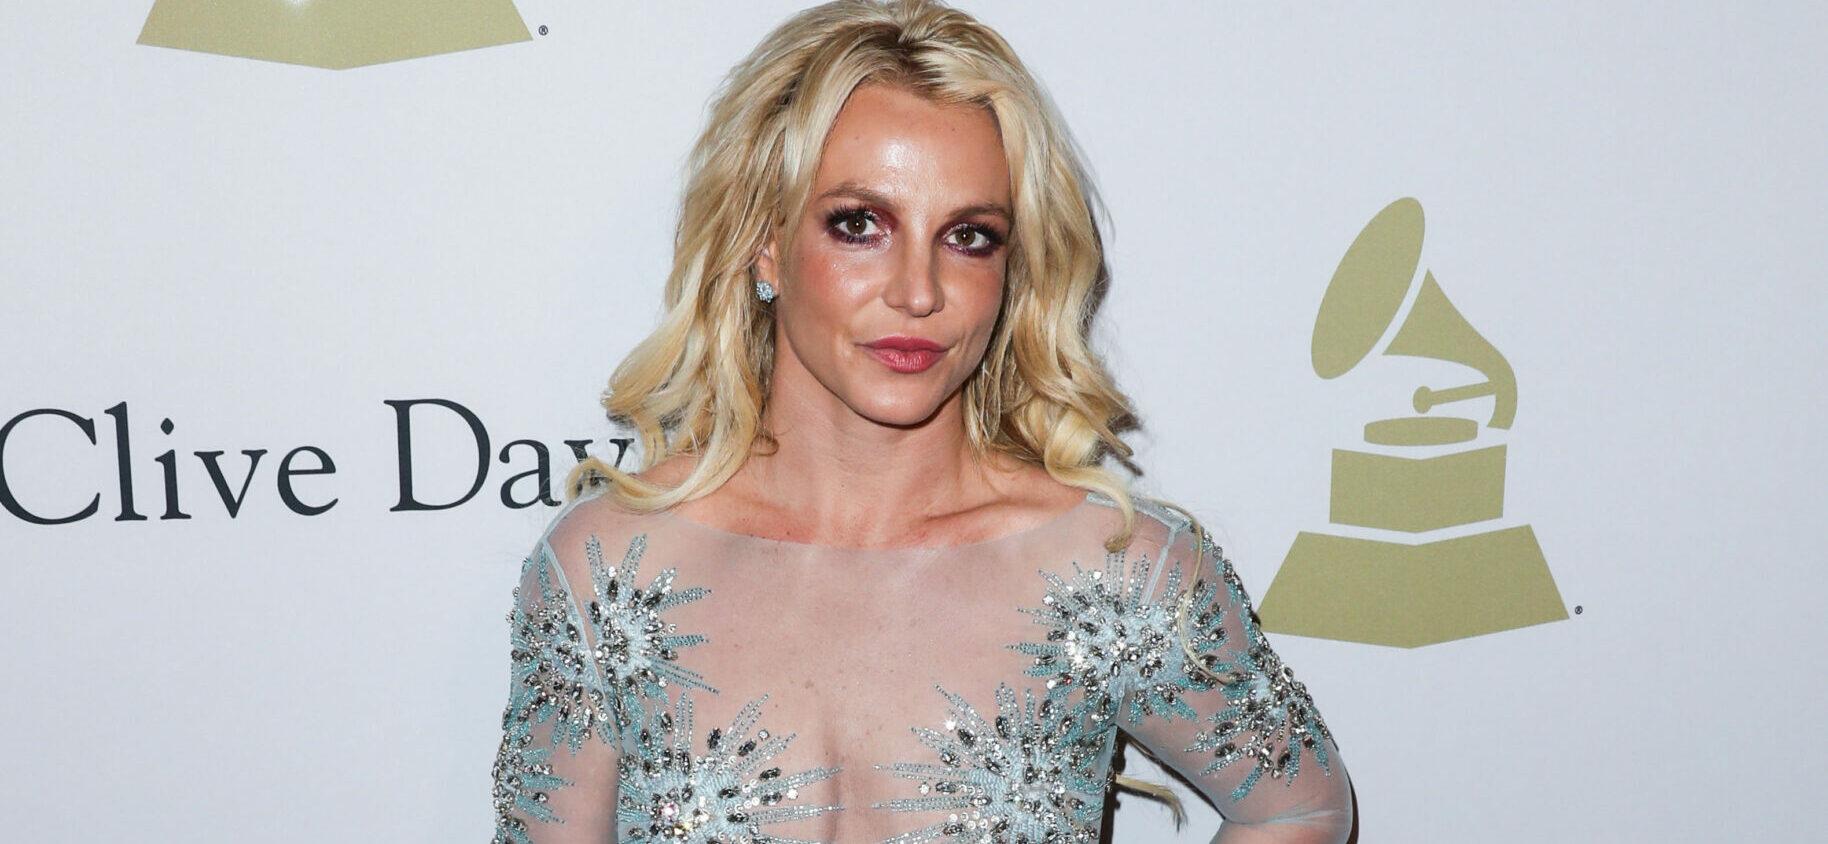 Britney Spears’ Legal Team Going After Ex-Business Managers Over Finances